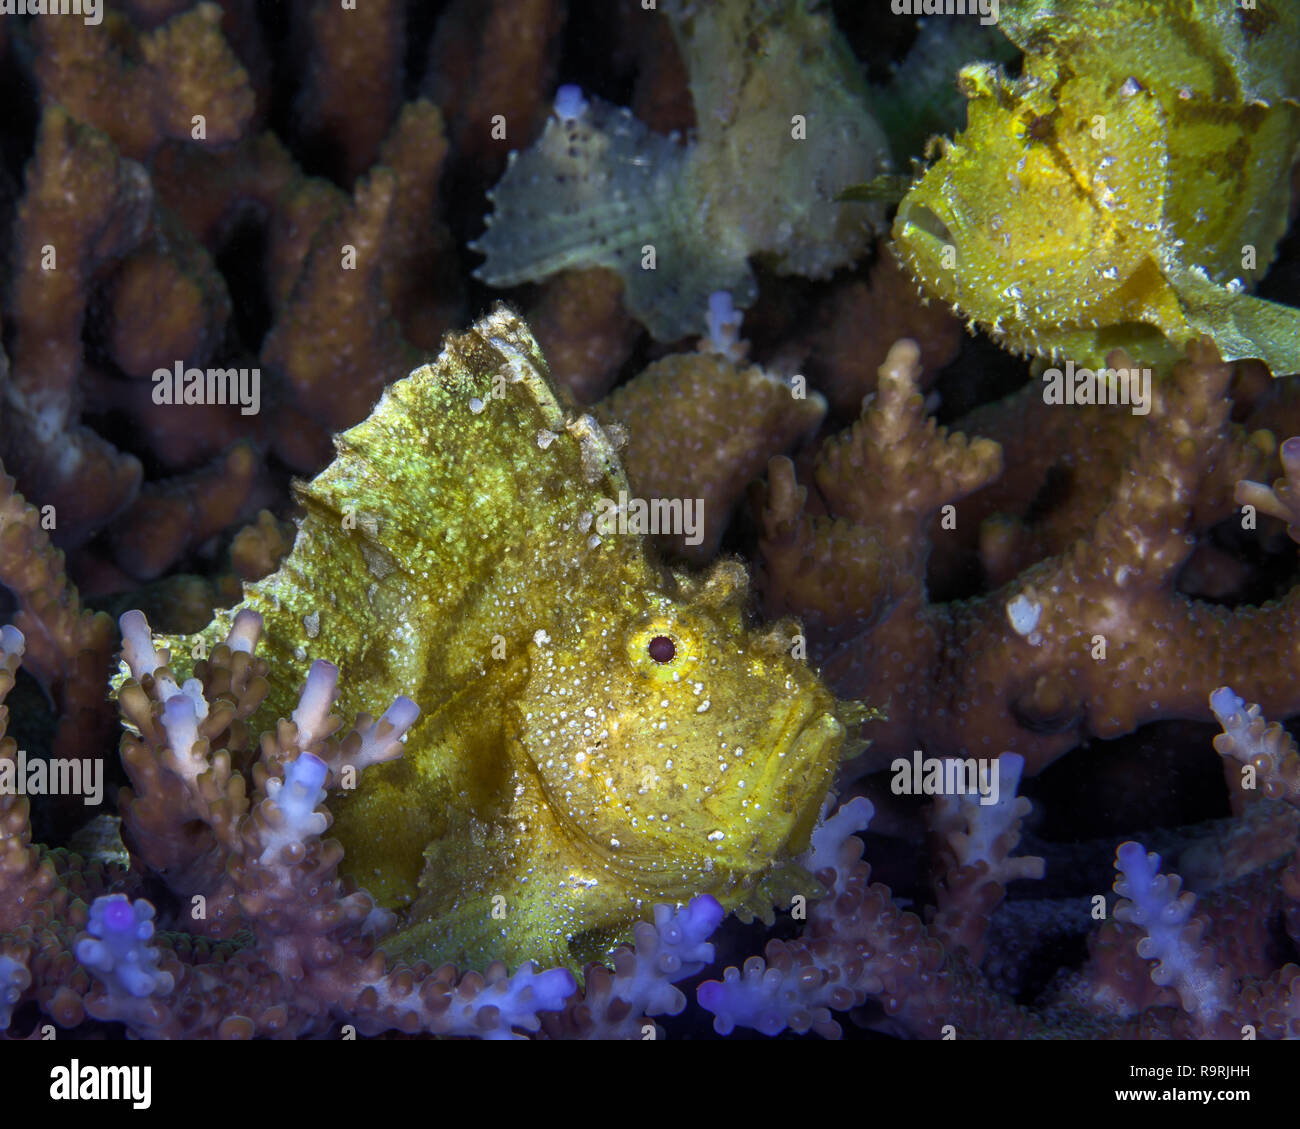 Yellow leaf scorpionfish  (Taenianotus triacanthus) lying in wait camouflaged among the corals. Ambon Bay, Indonesia. Stock Photo